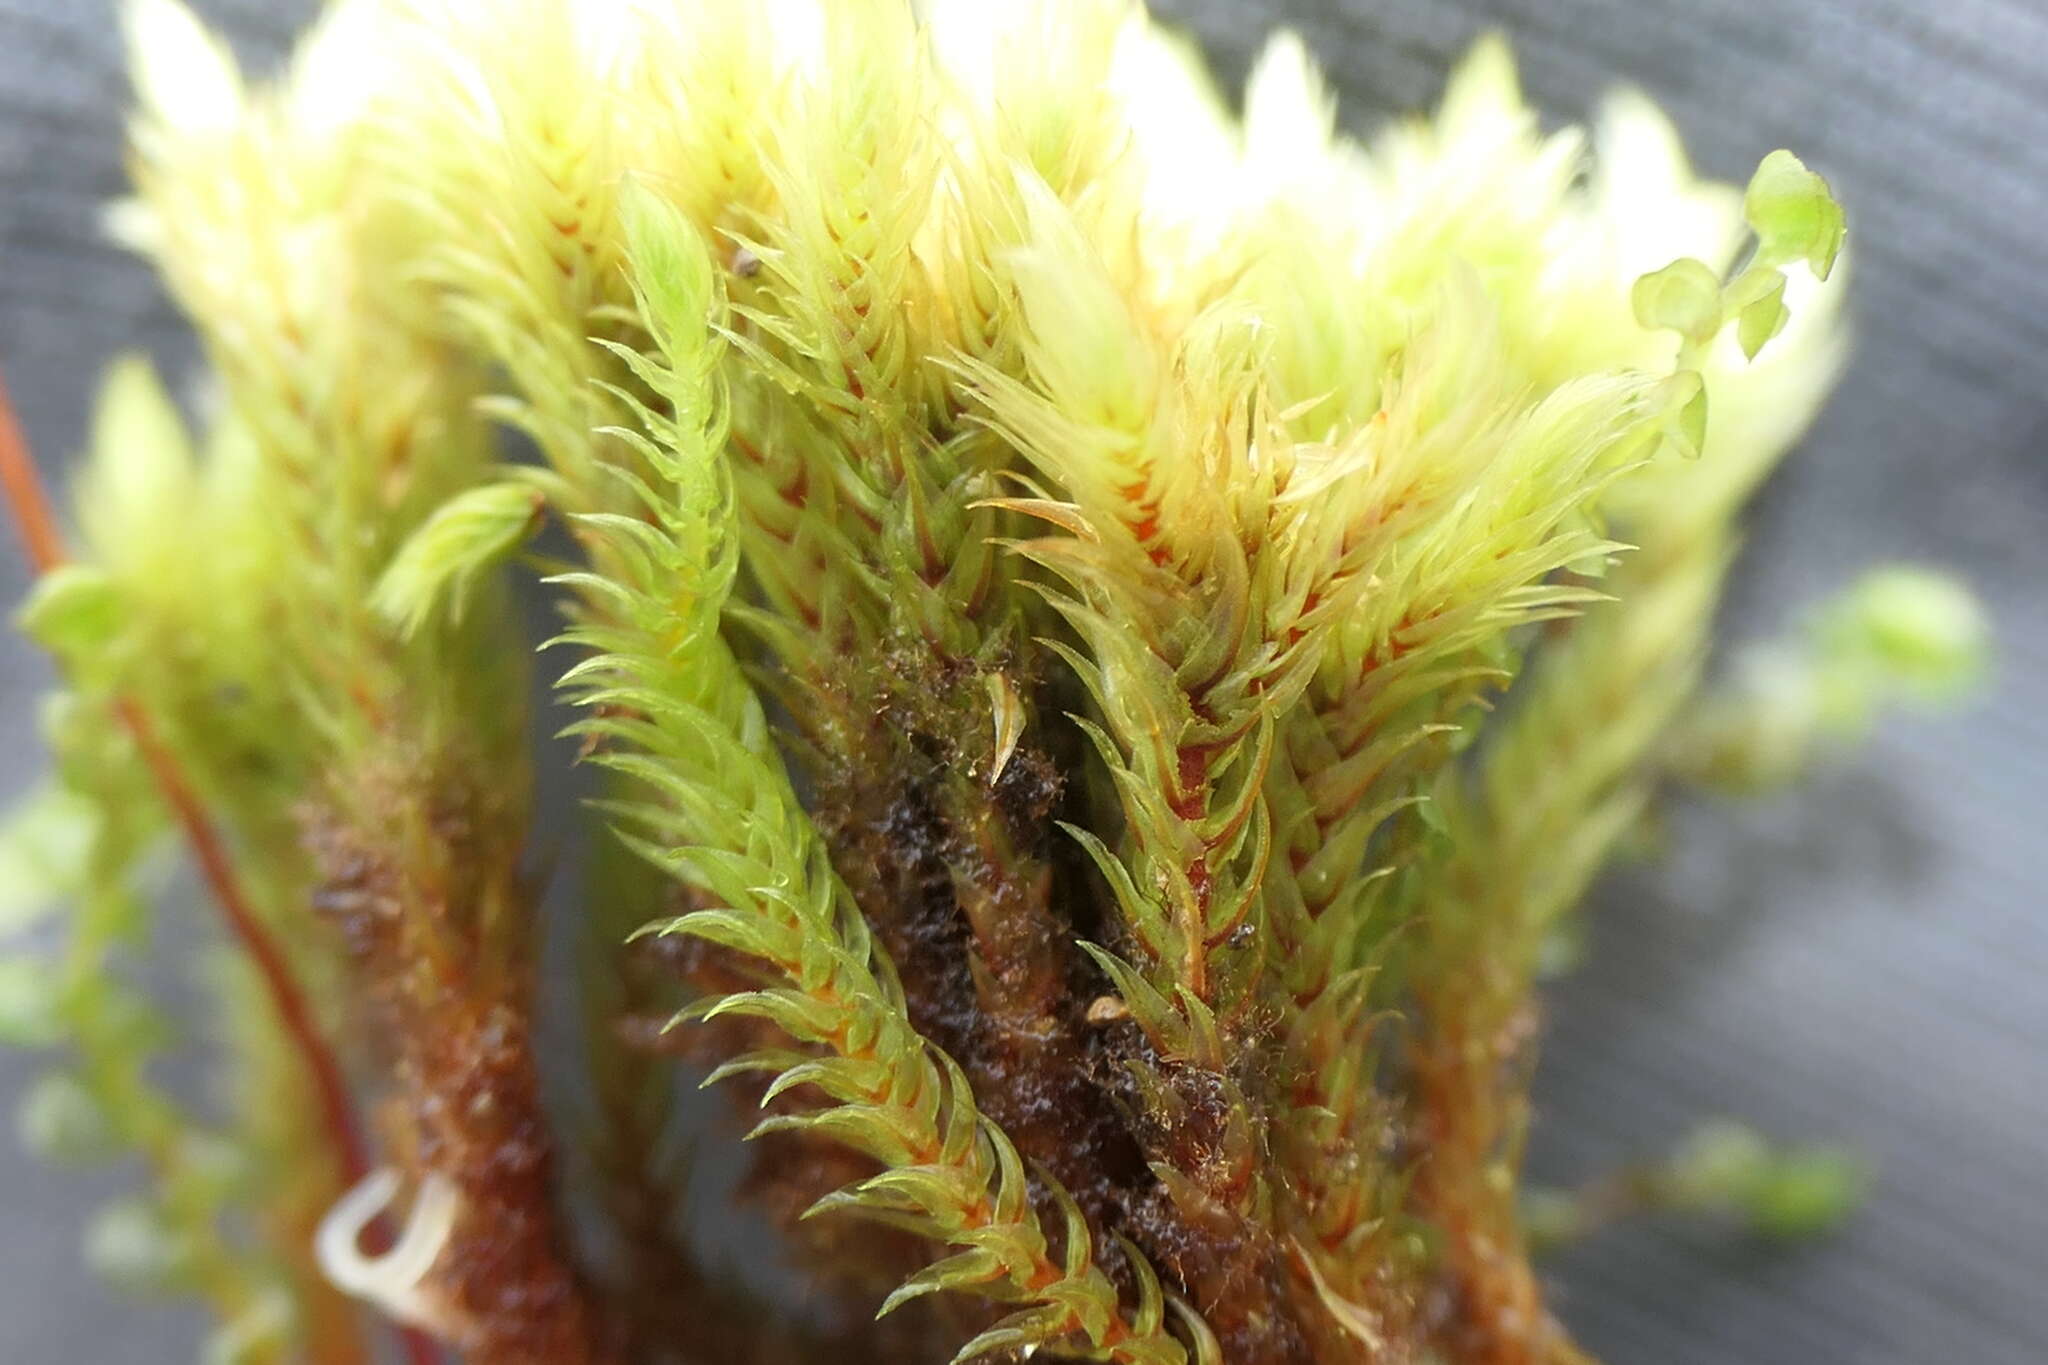 Image of thick-nerved apple-moss